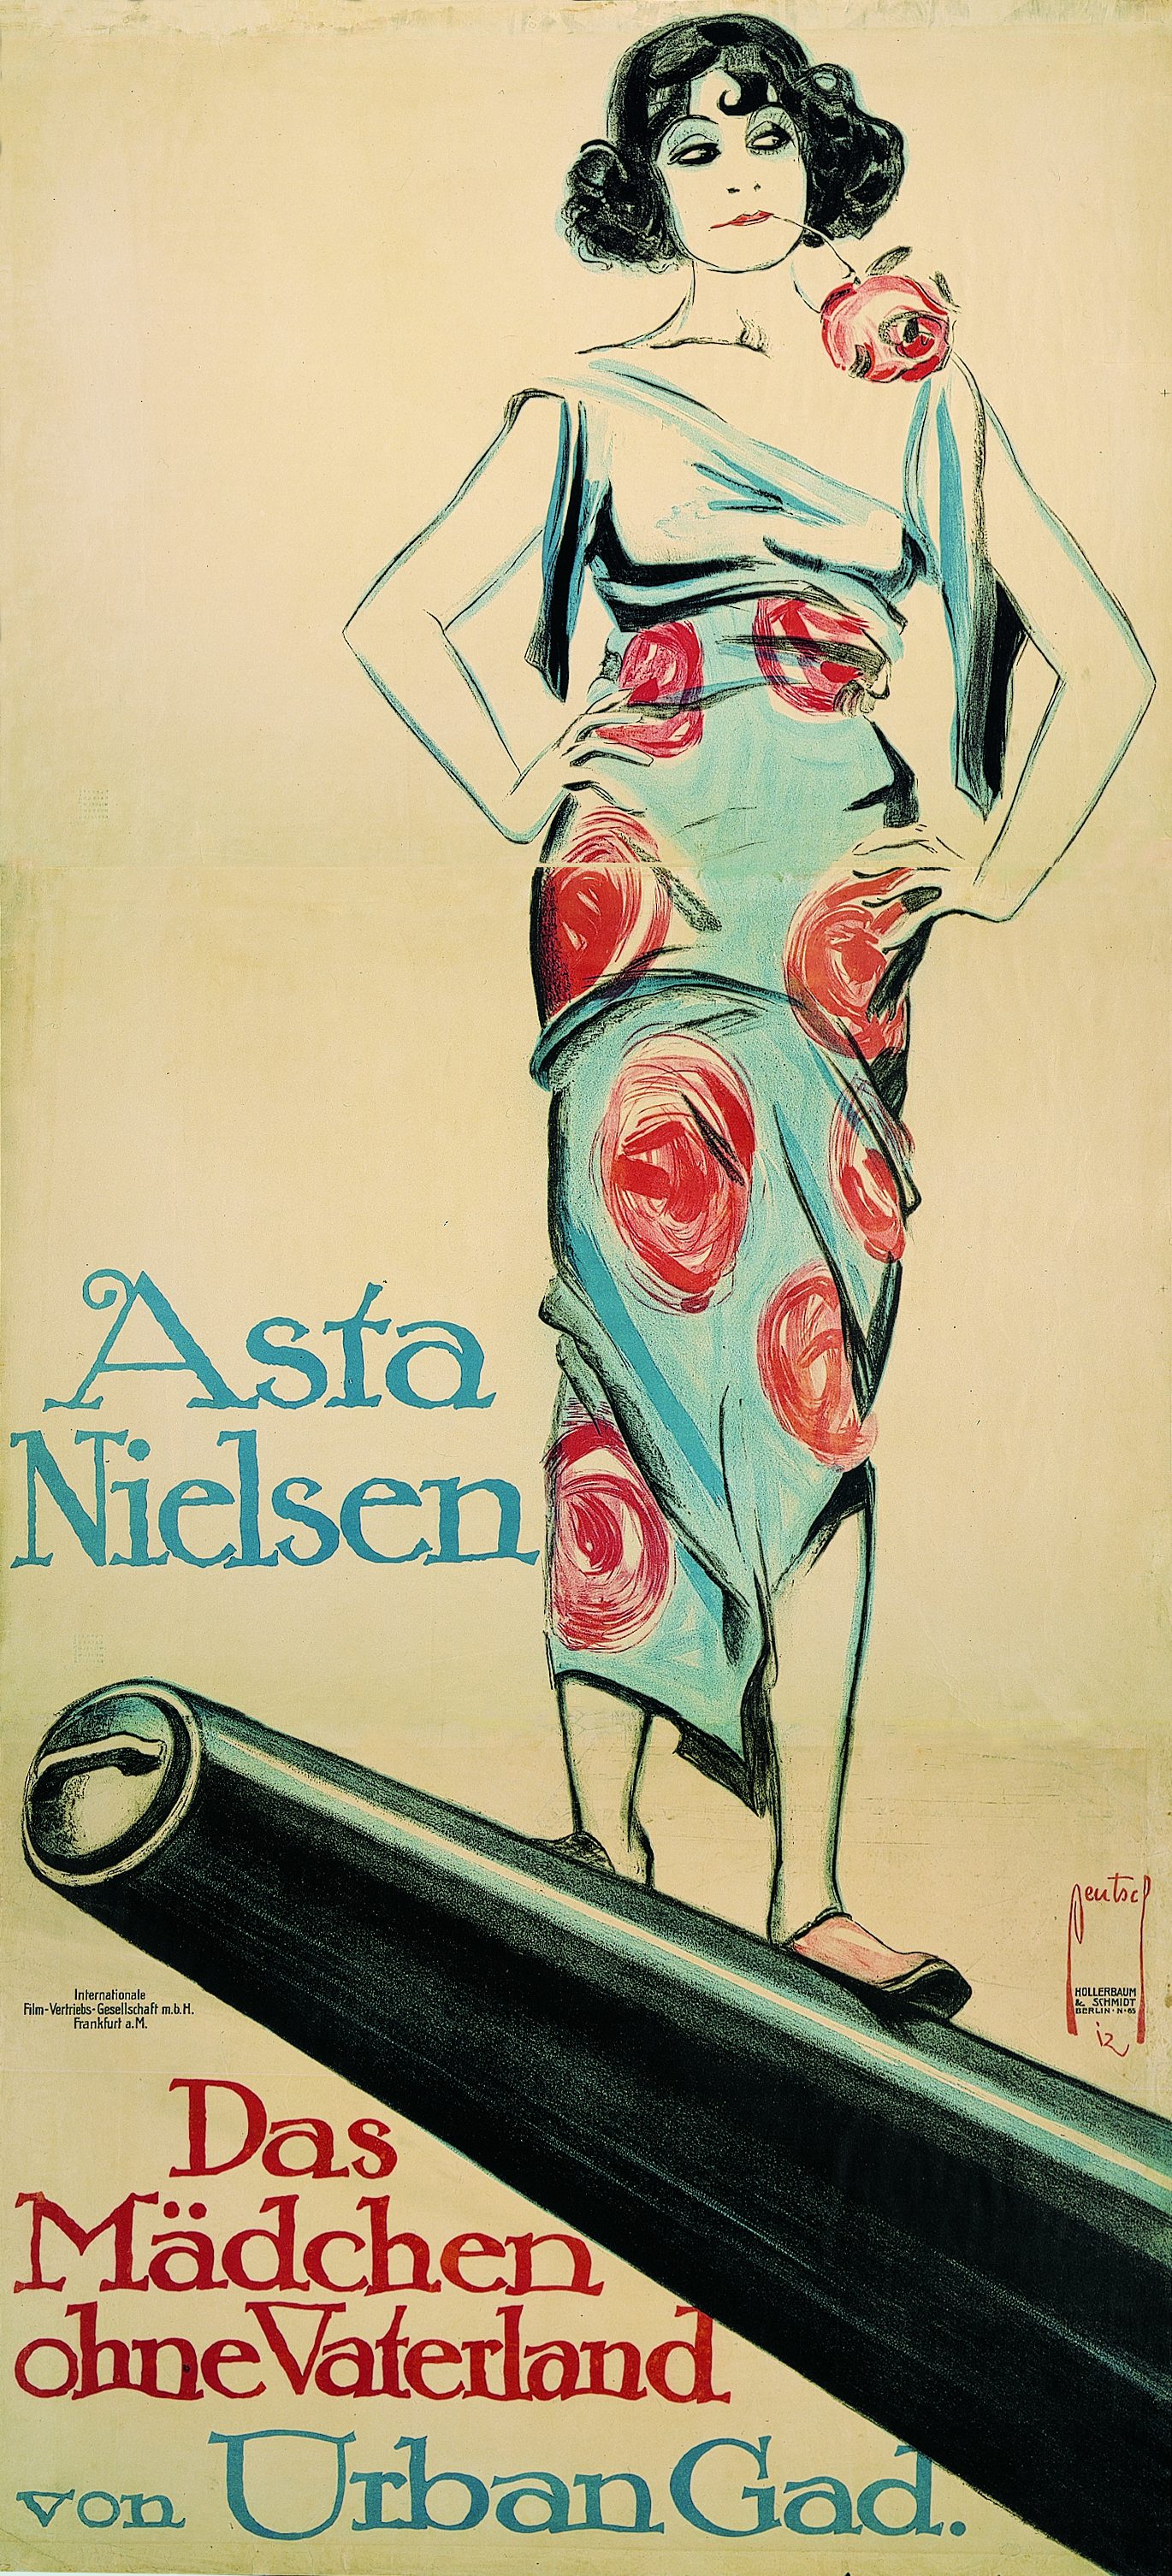 Premier poster with Asta Nielsen